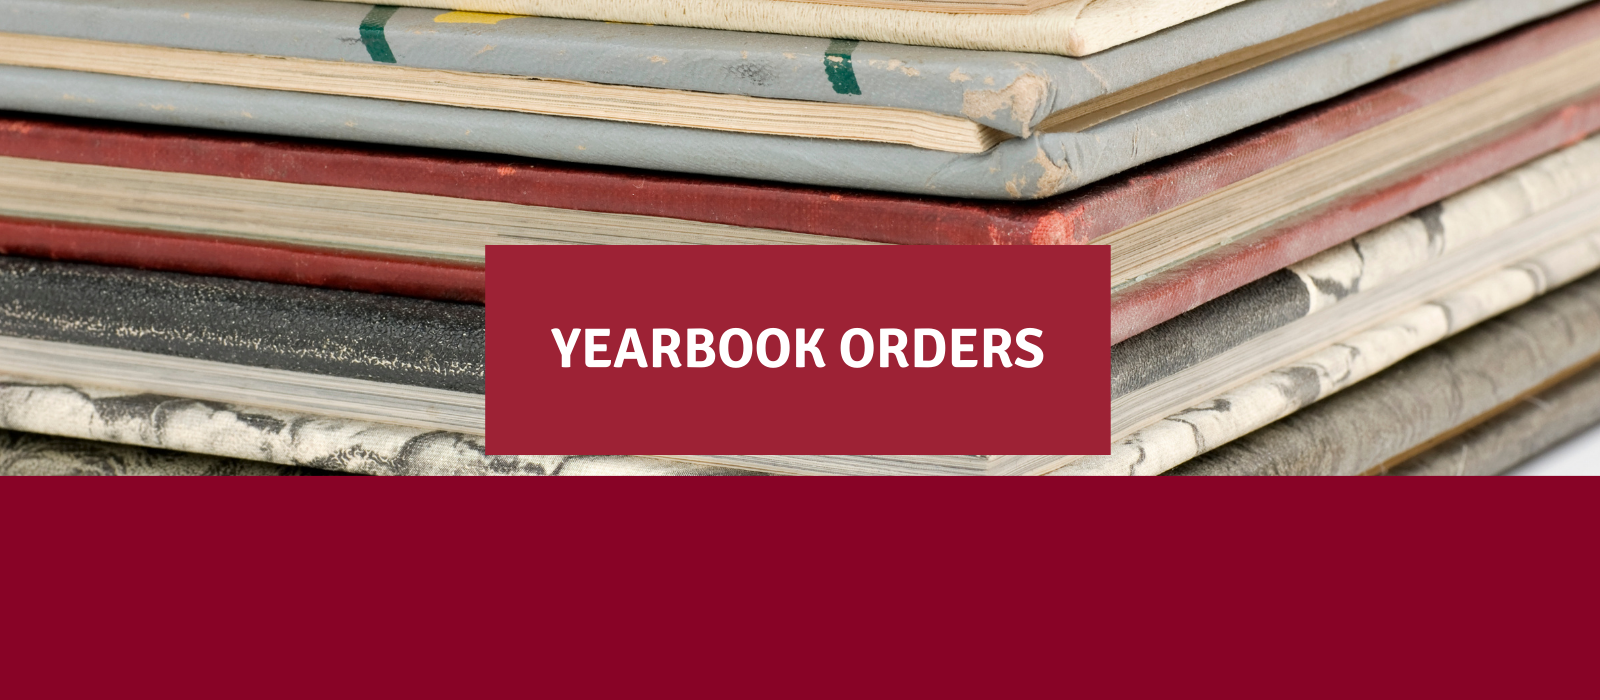 <h2>Need to order a Yearbook?</h2>
<a href="https://bhs.bps101.net/yearbook-orders/" class="button ">Details Here</a>
